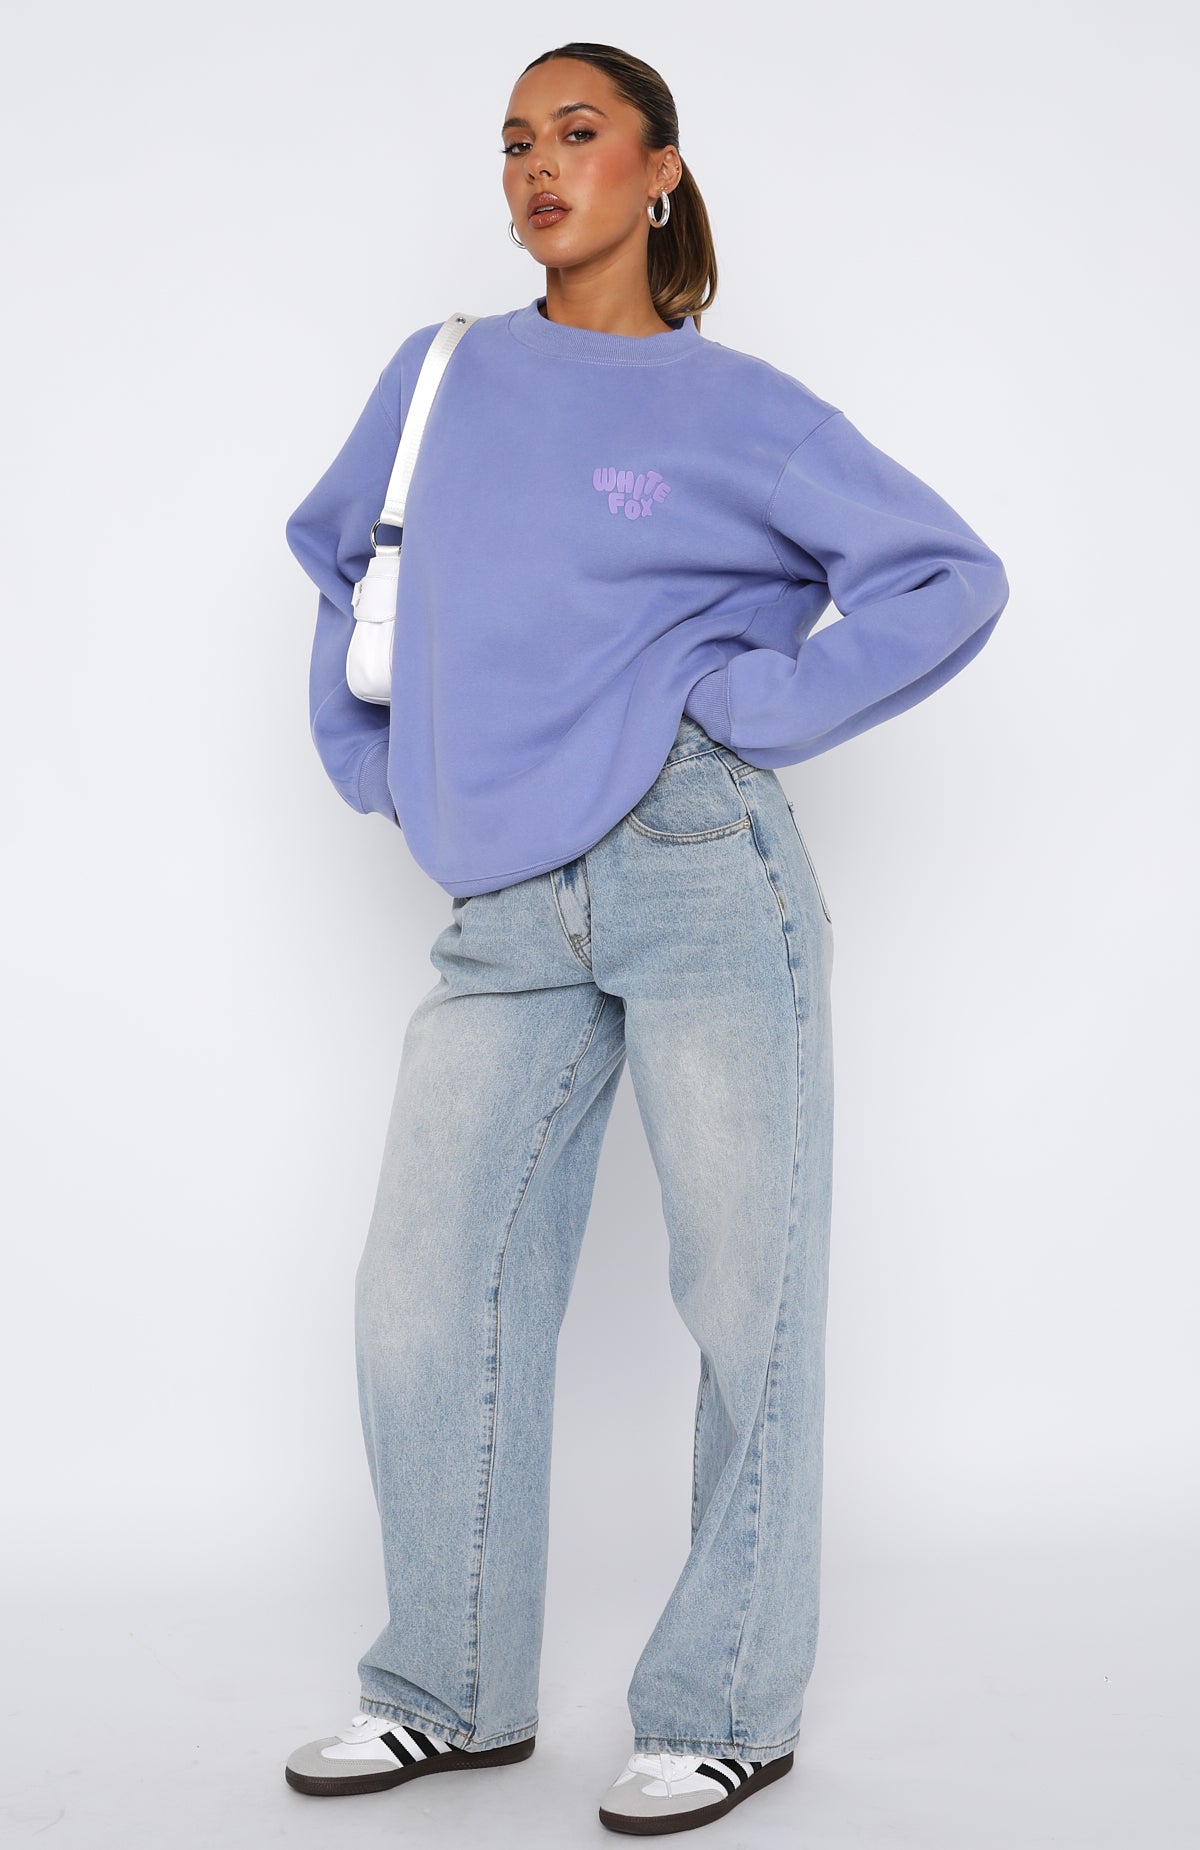 You're Always Right Oversized Sweater Grape | White Fox Boutique US